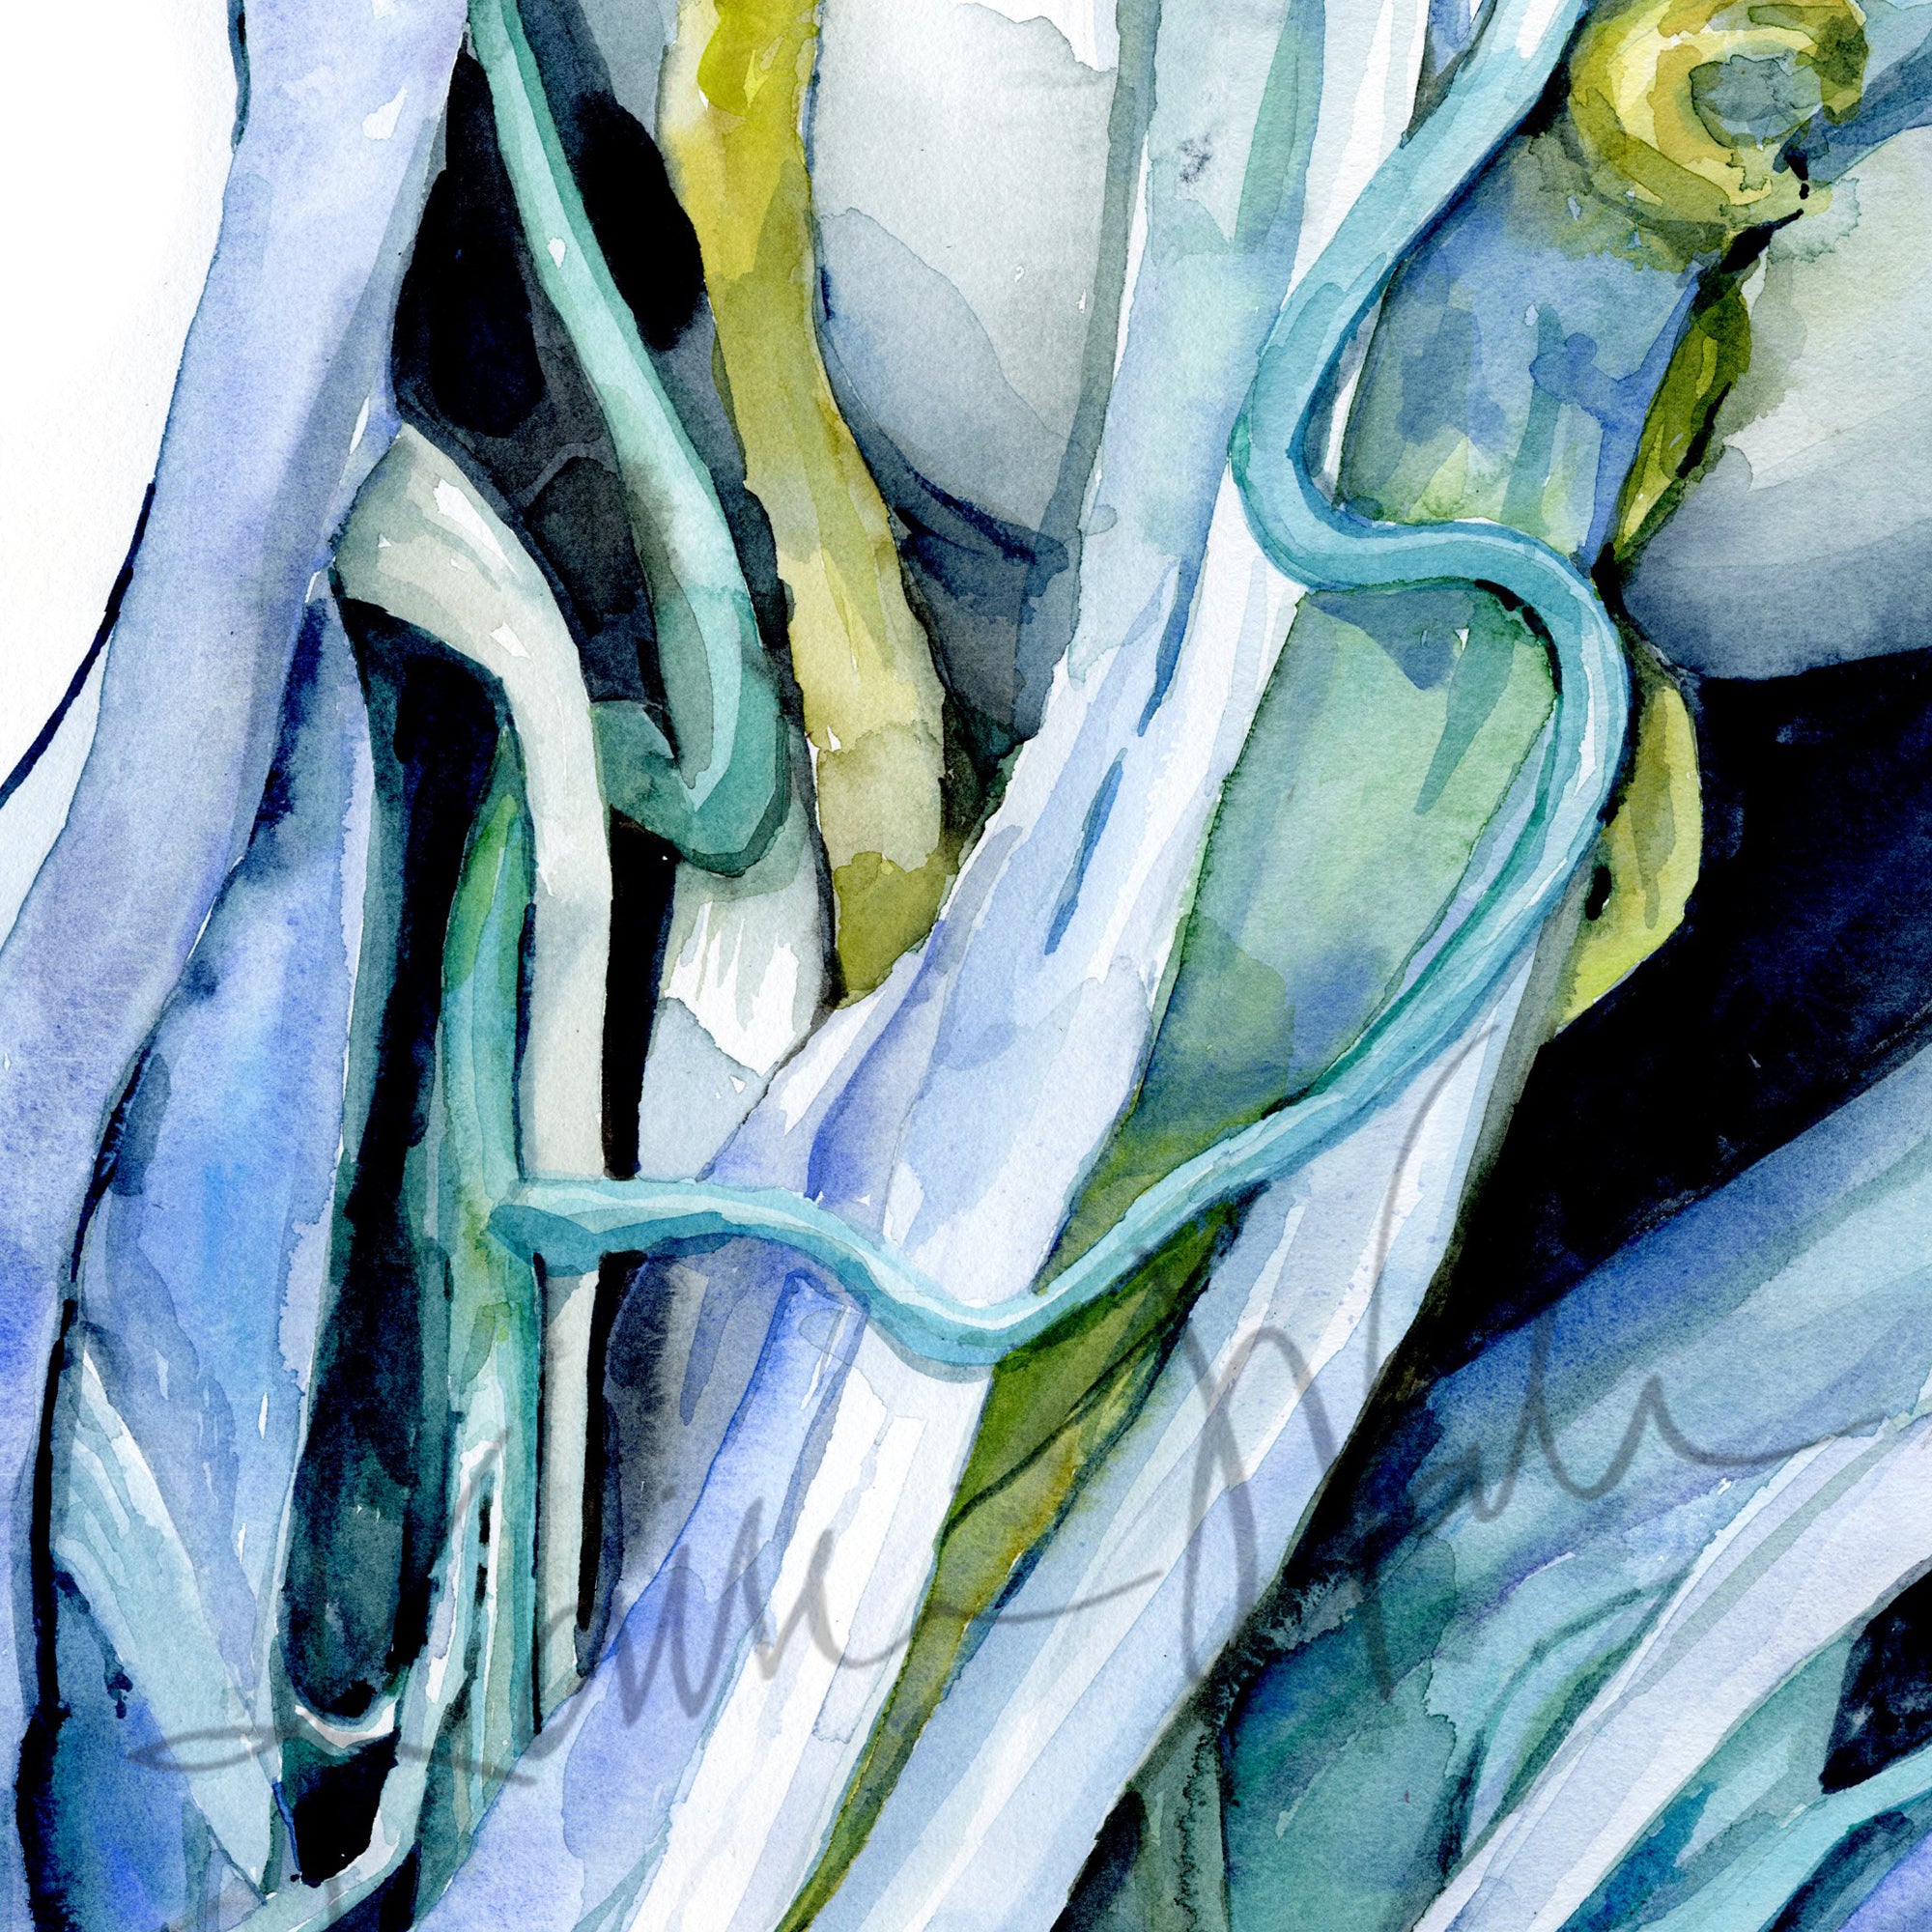 Zoomed in view of a watercolor painting of a dissection showing the orbital nerves and surrounding anatomy in blues, teals, and greens.